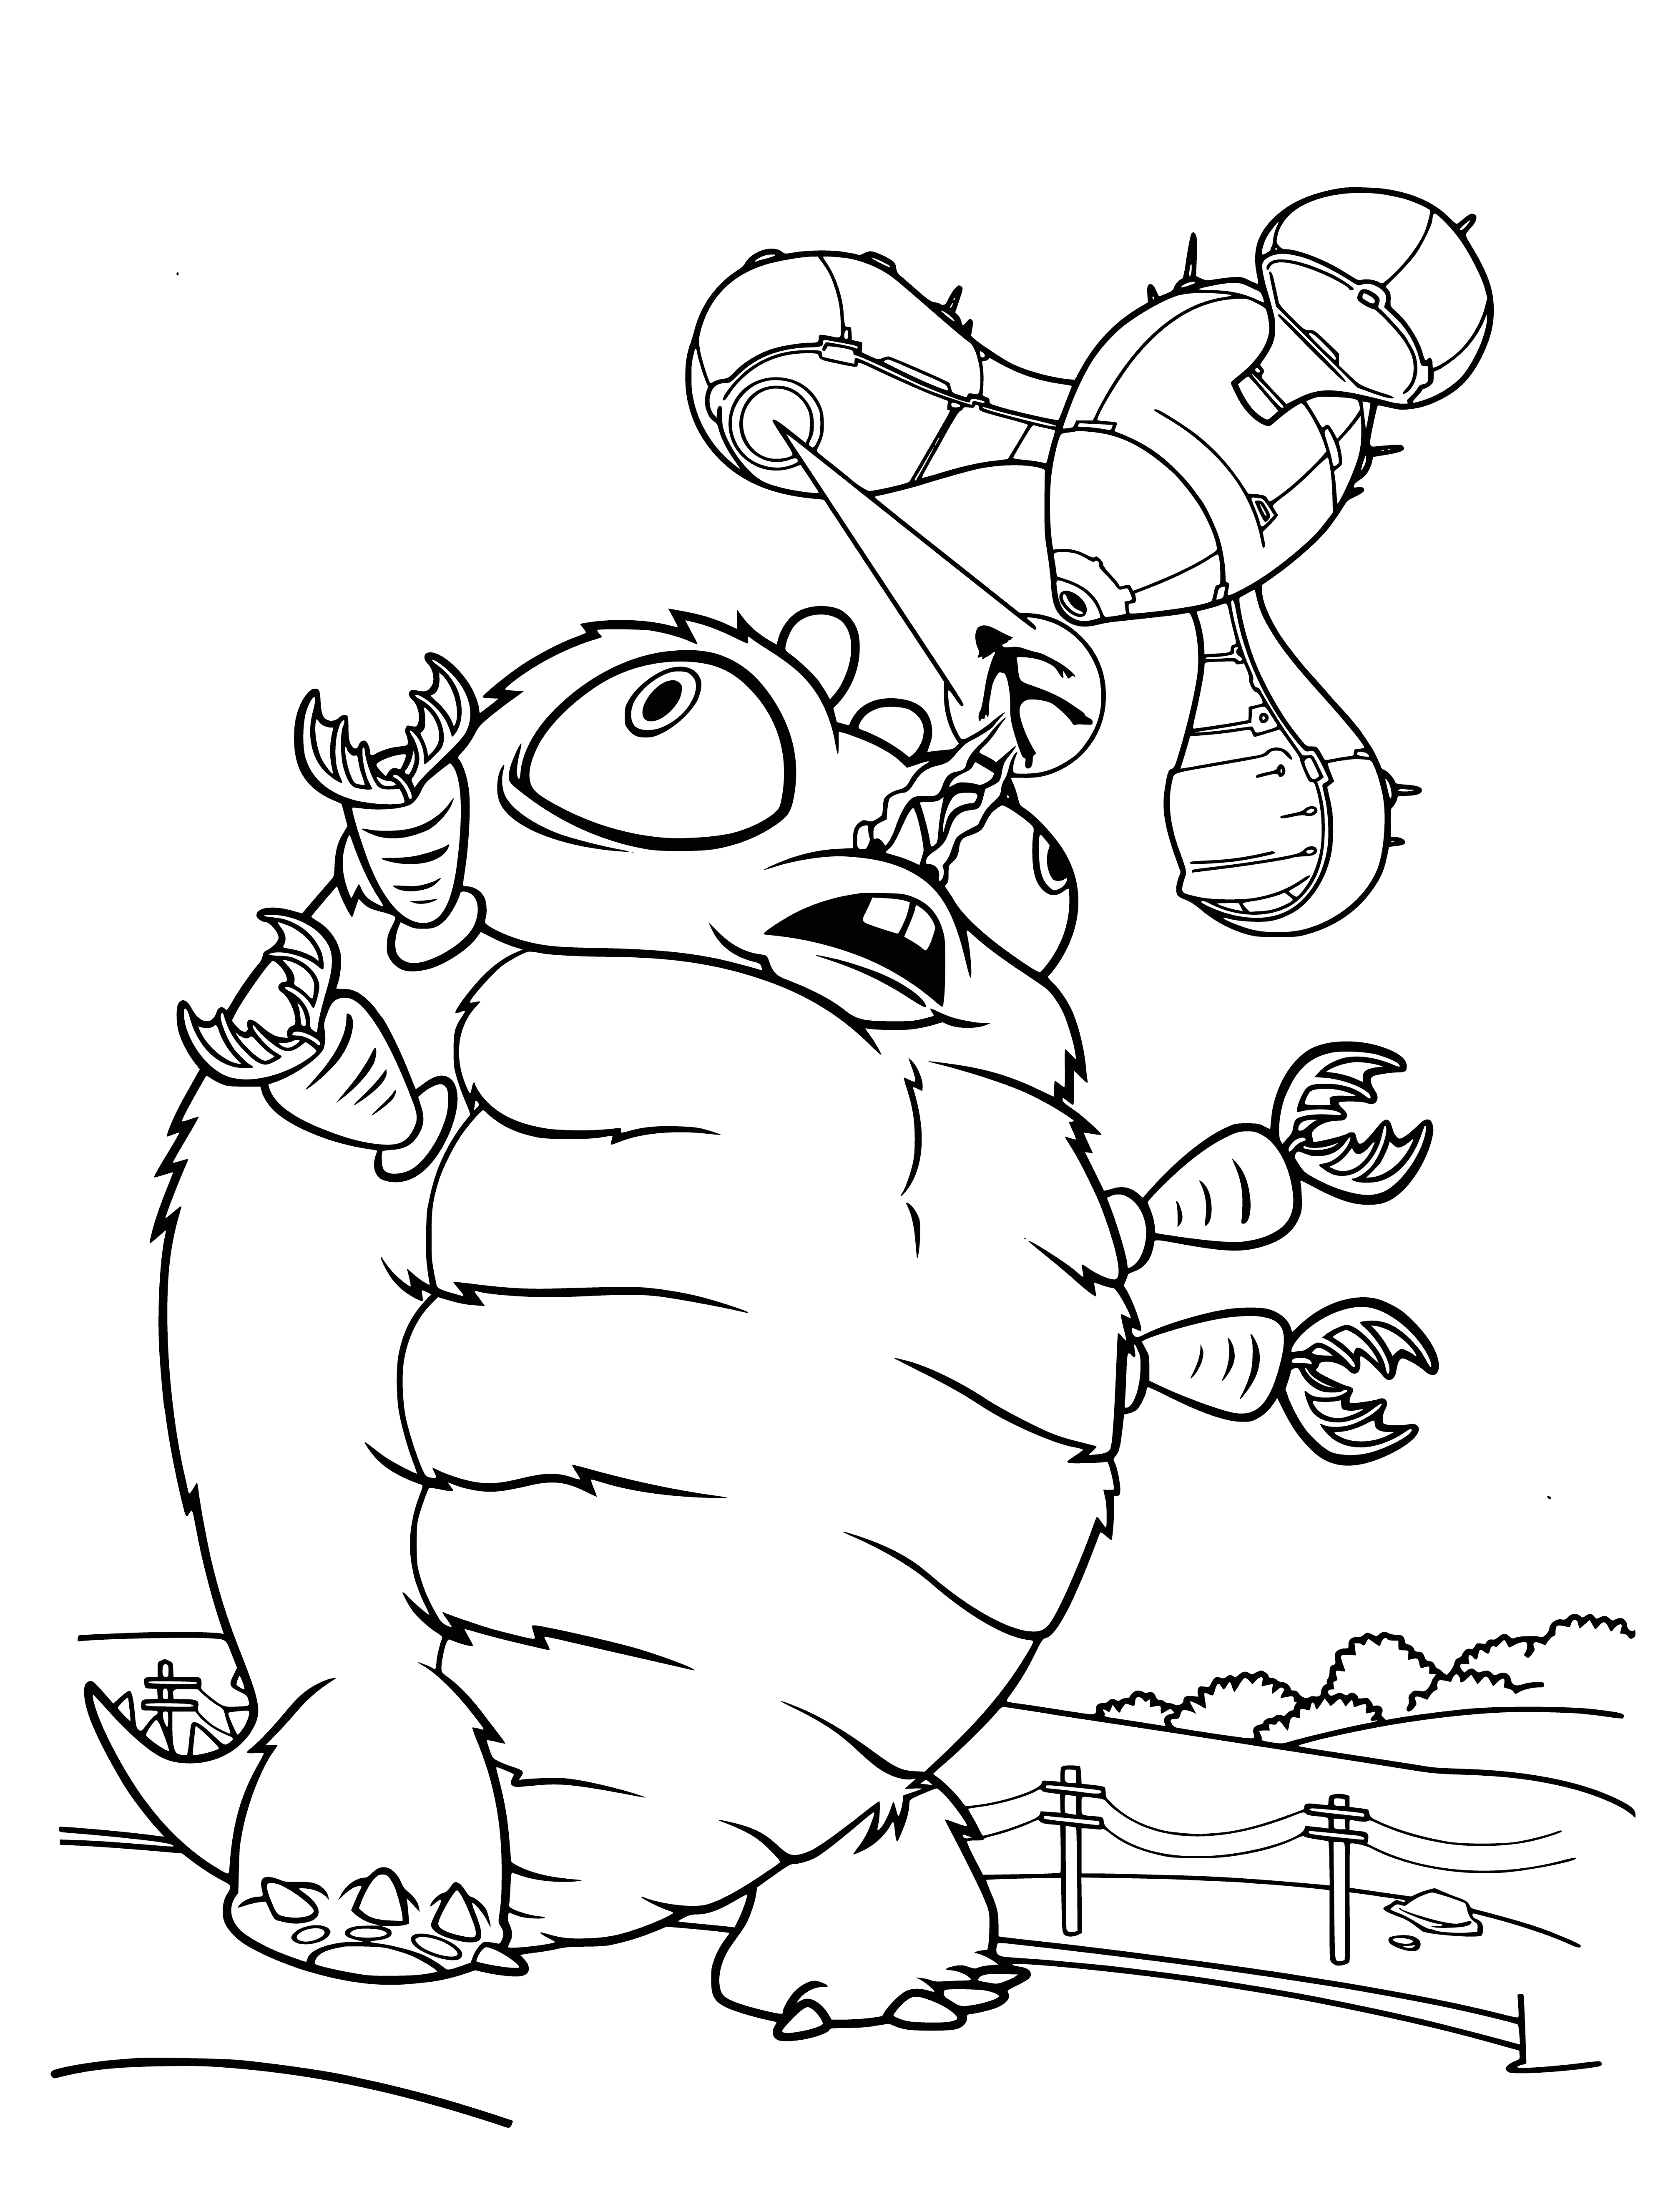 coloring page: Large blue horned creature w/ multiple eyes, spikes, teeth, claws & long tail.